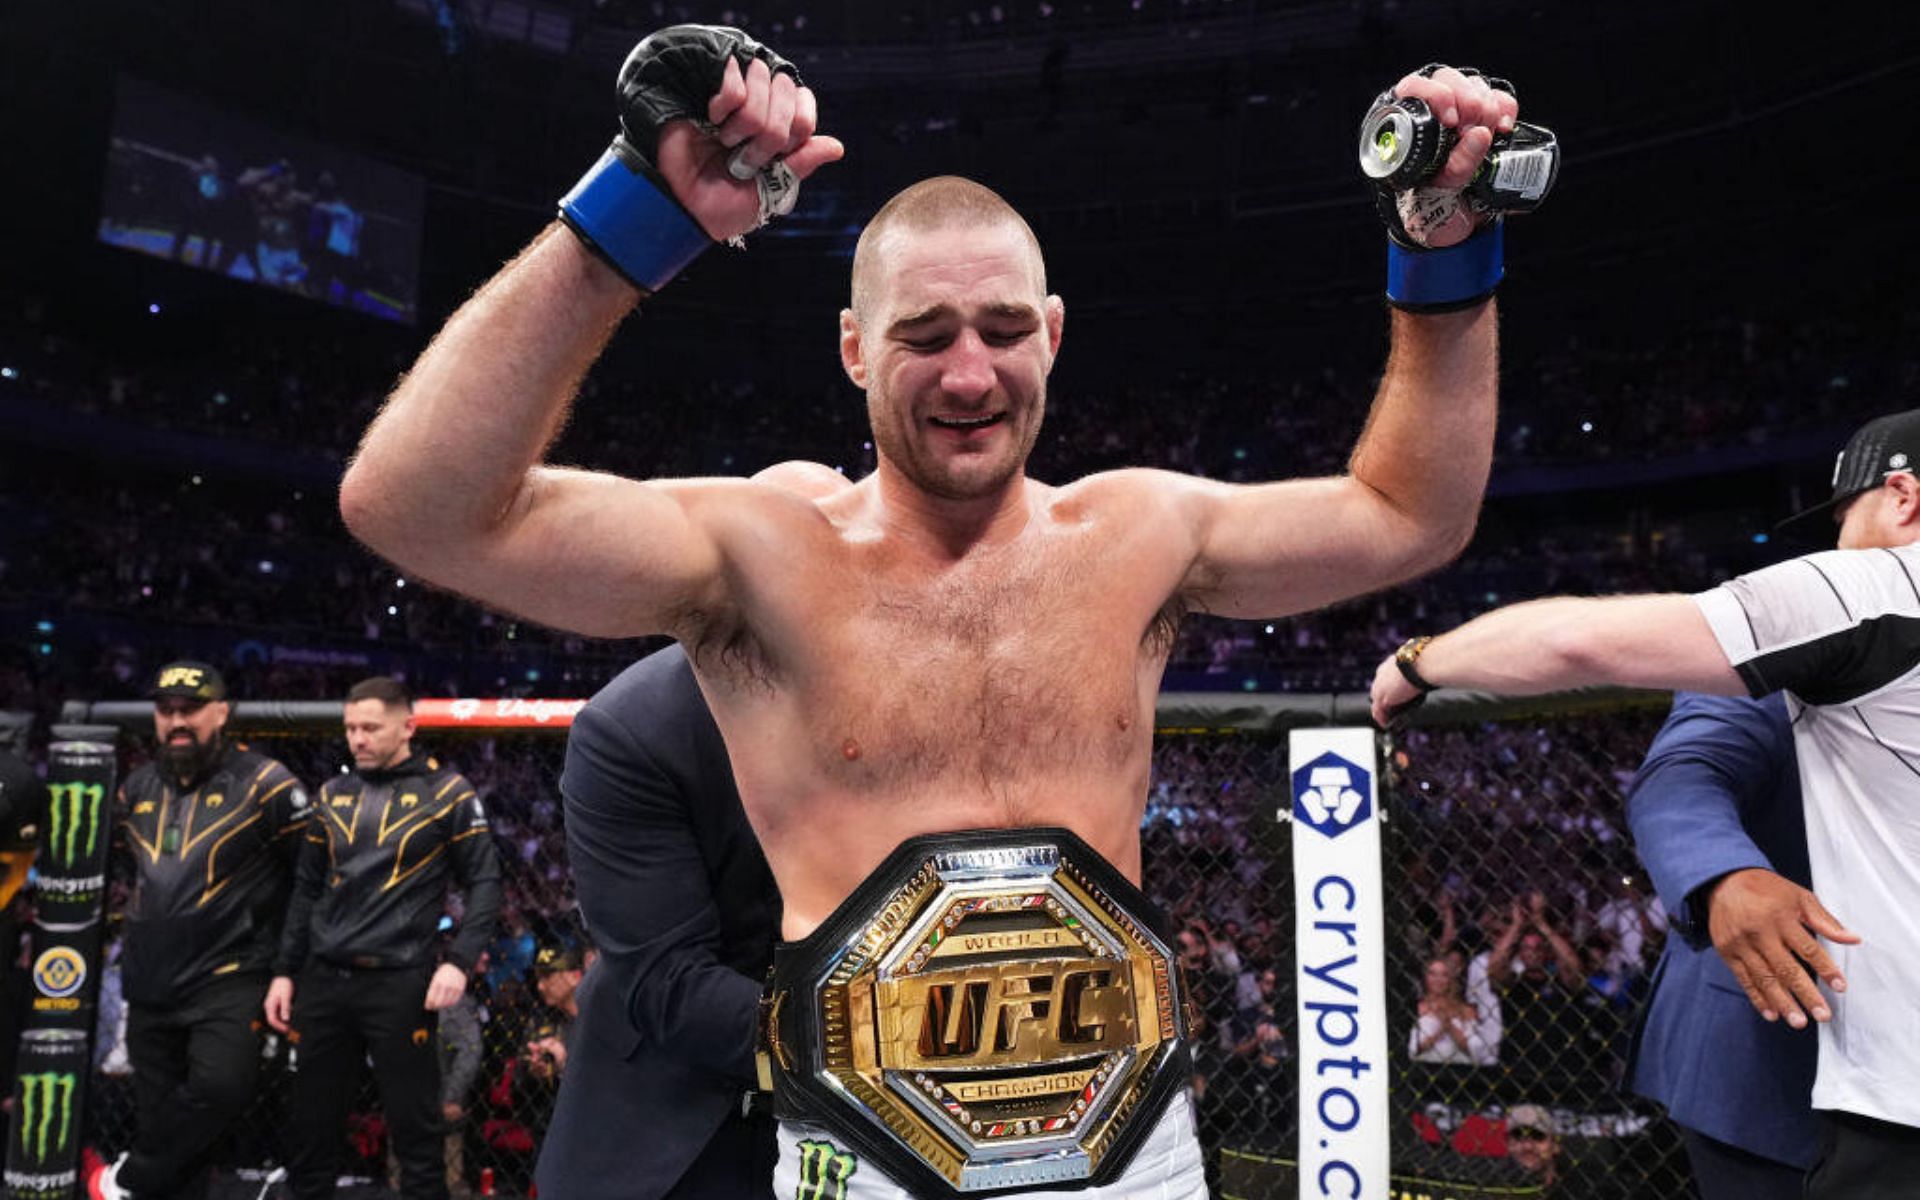 UFC middleweight champion Sean Strickland lashes out at how the UFC handles failed drug tests